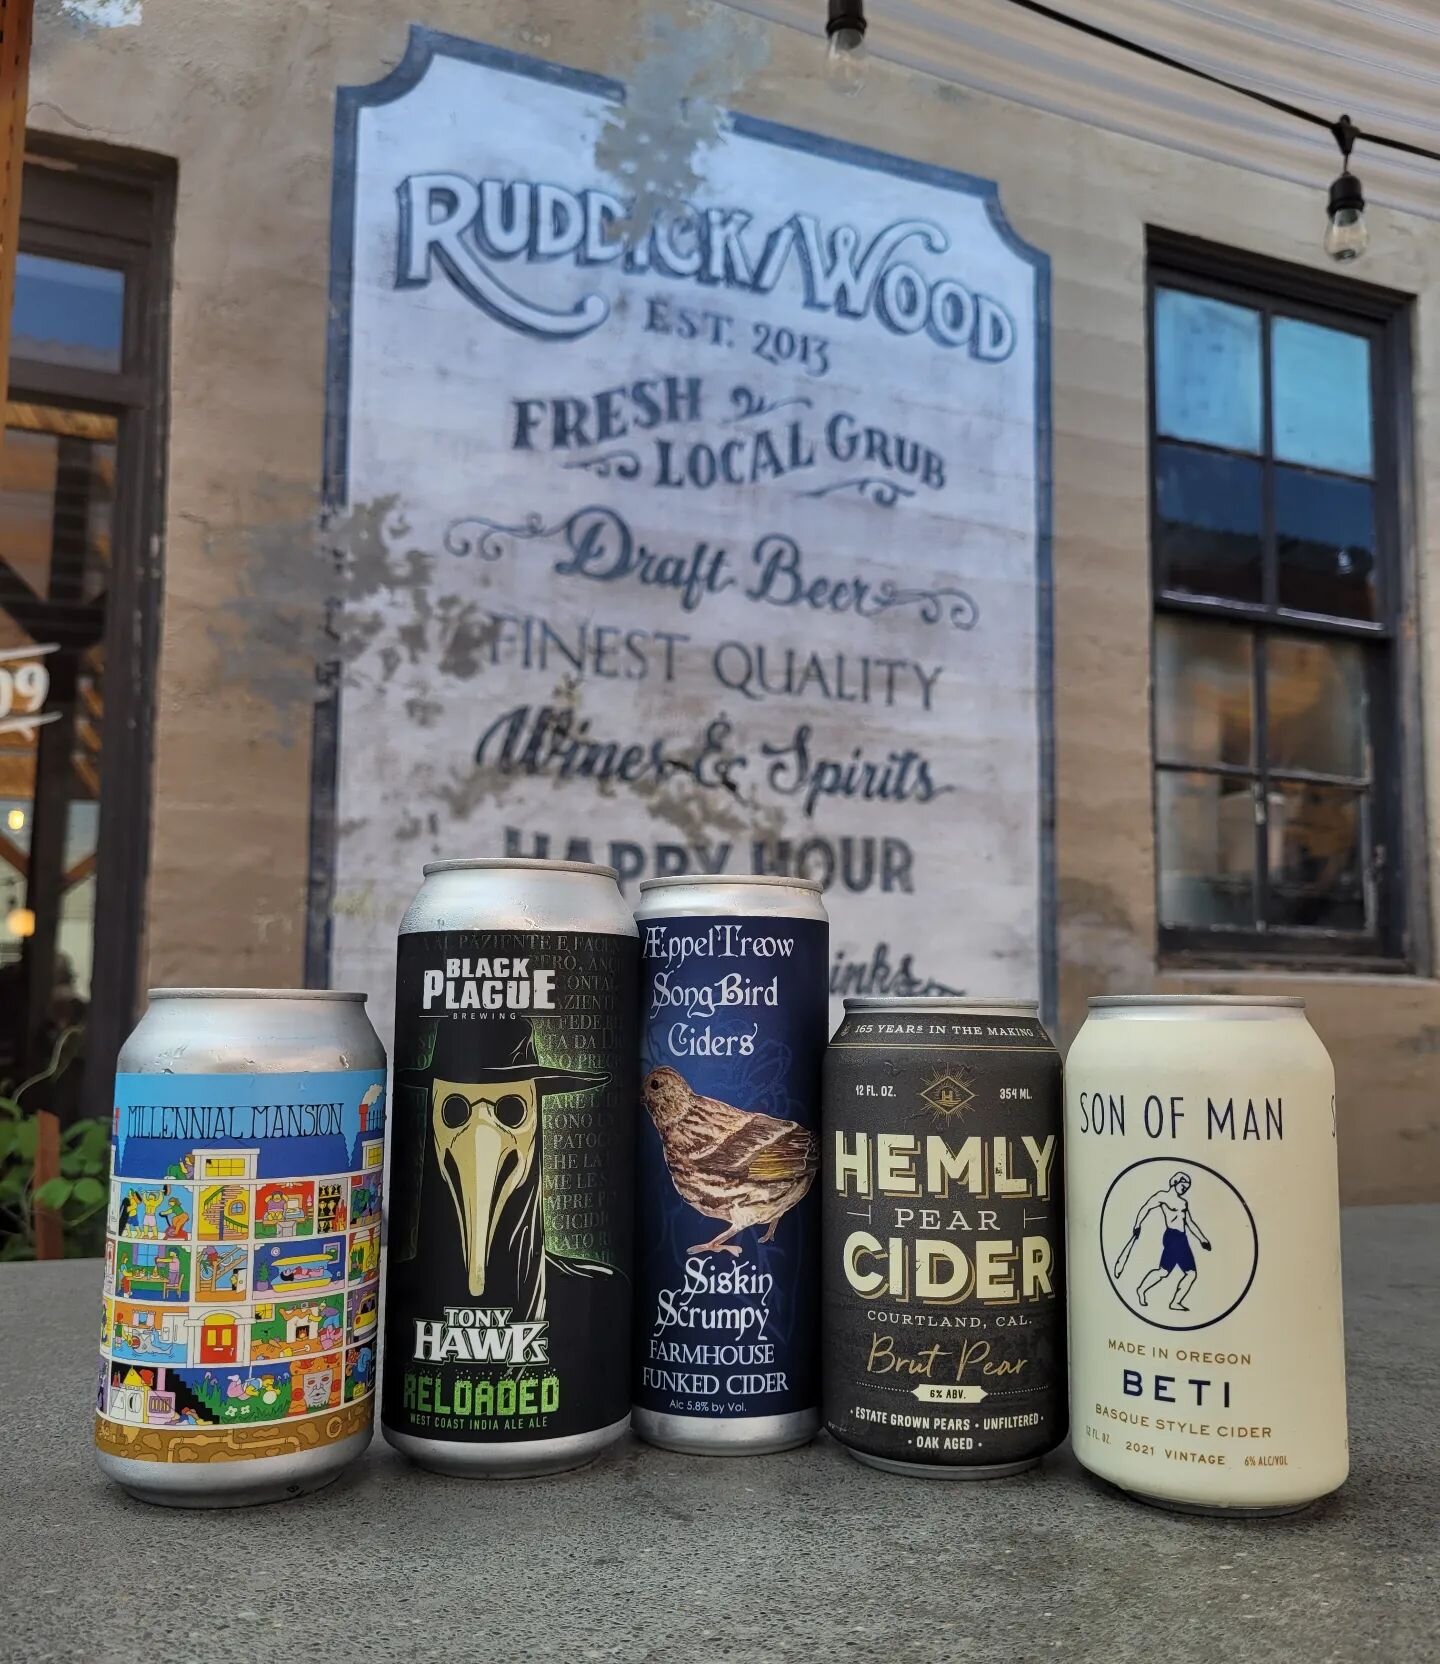 For all you beer and cider fans out there, we can't add taps but luckily folks like @upstandingdistro offer us a lot of amazing options in cans and bottles. 

Pop in and check out our expanding beer and cider list, starting off with these gems from @